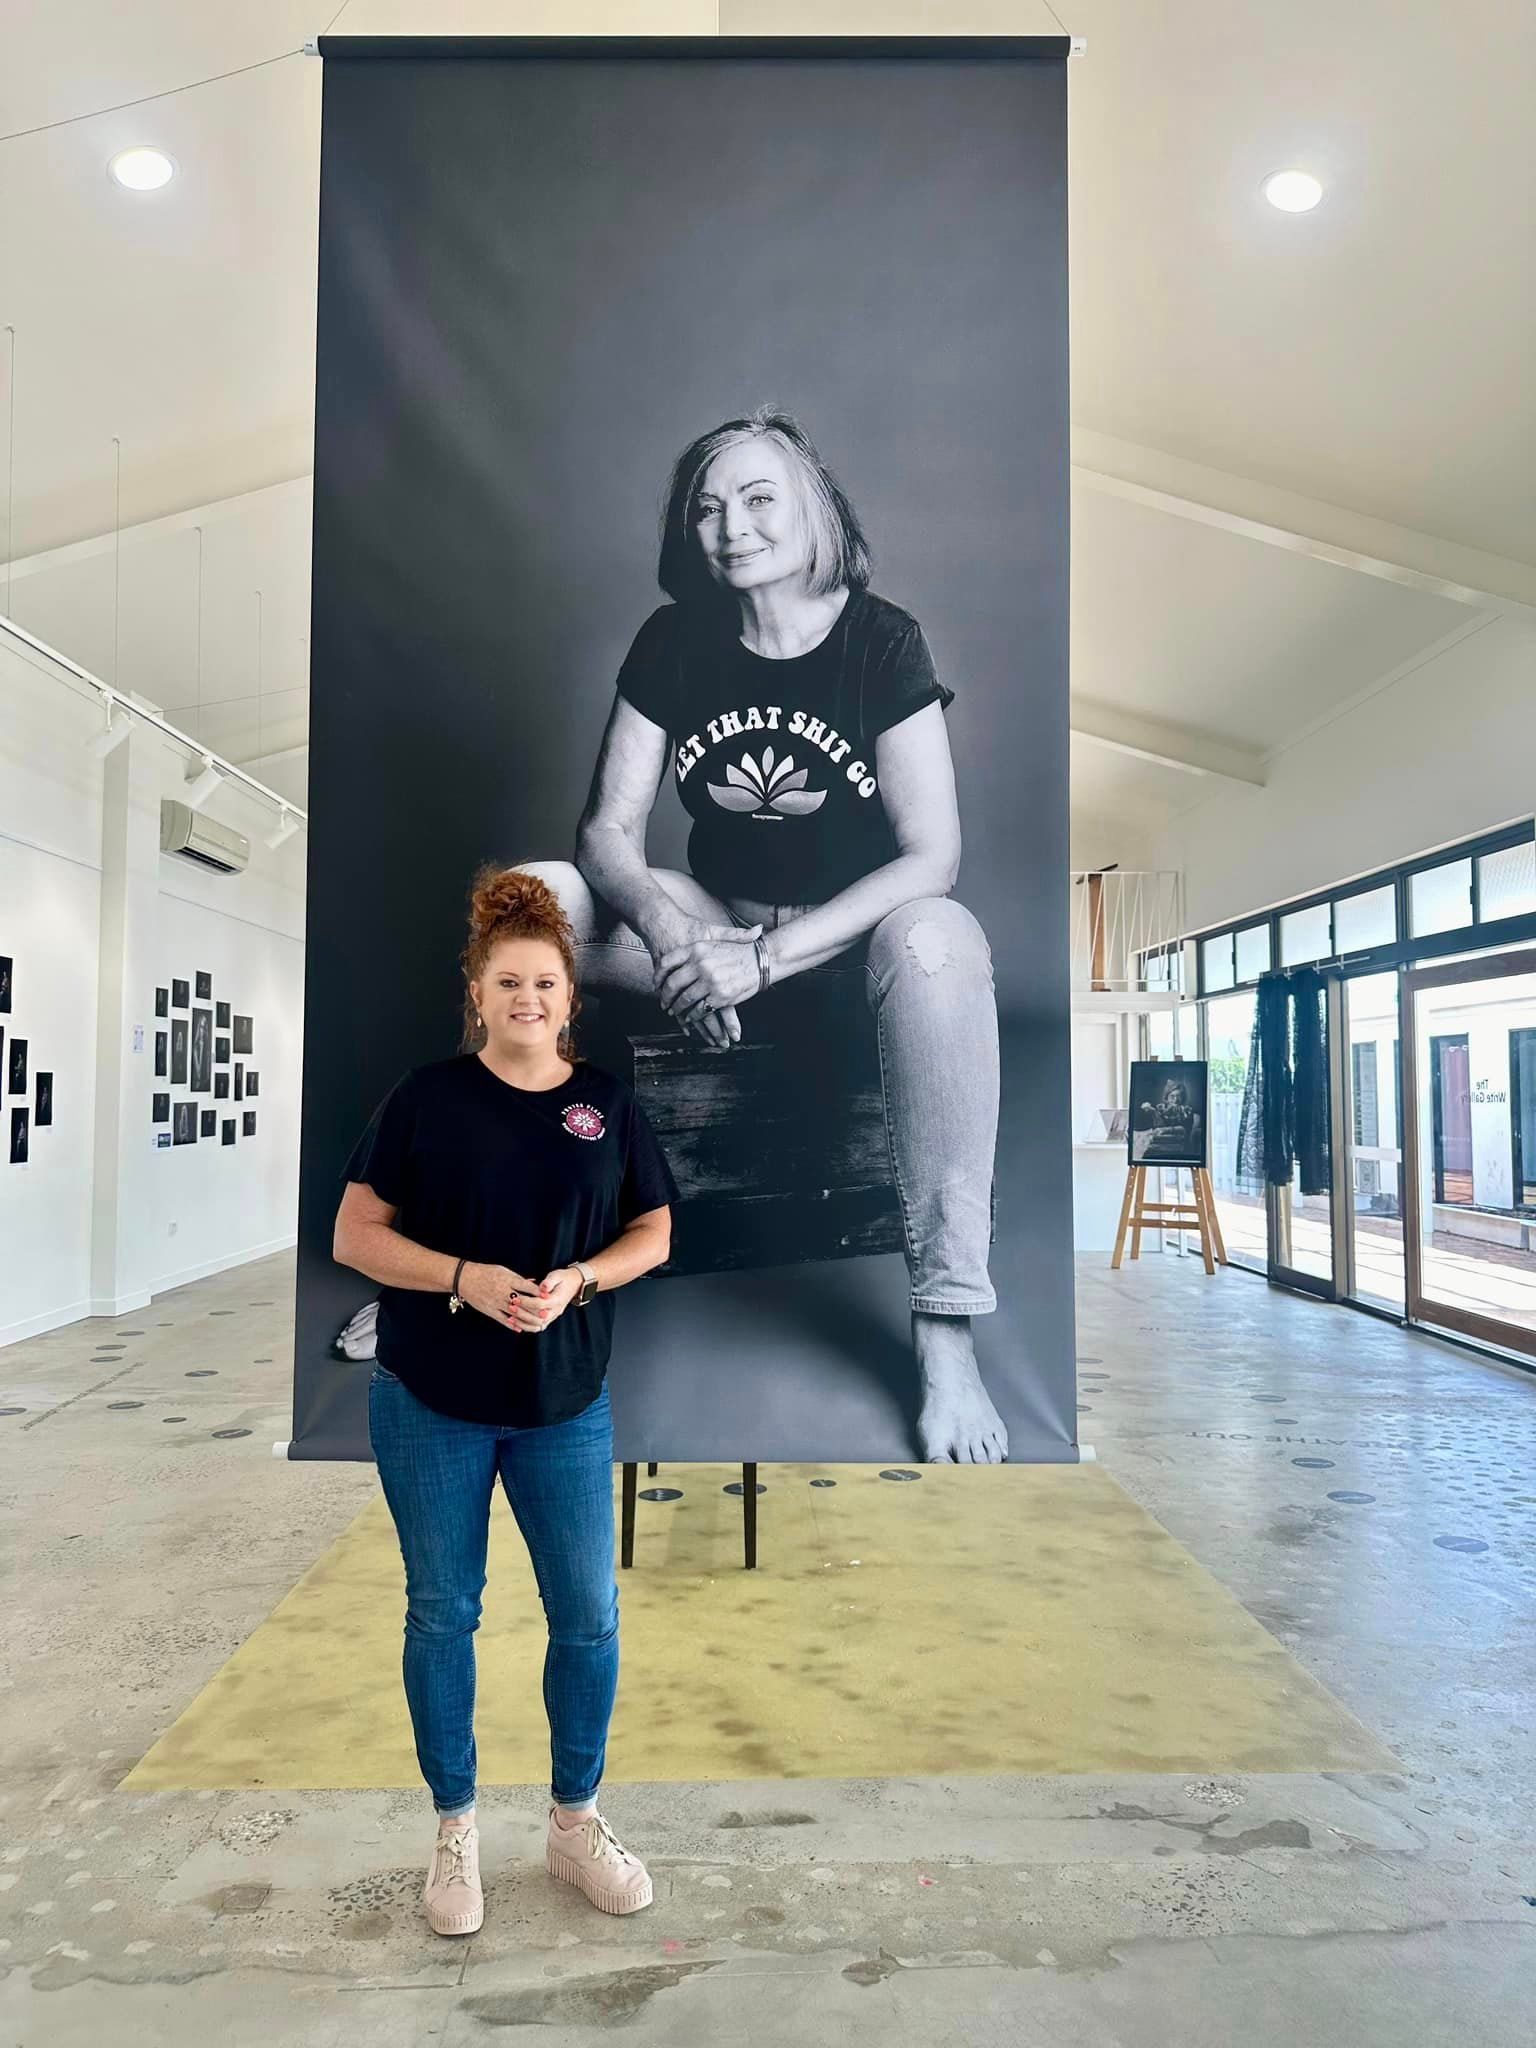 A woman is standing in front of a large black and white photo of a woman.